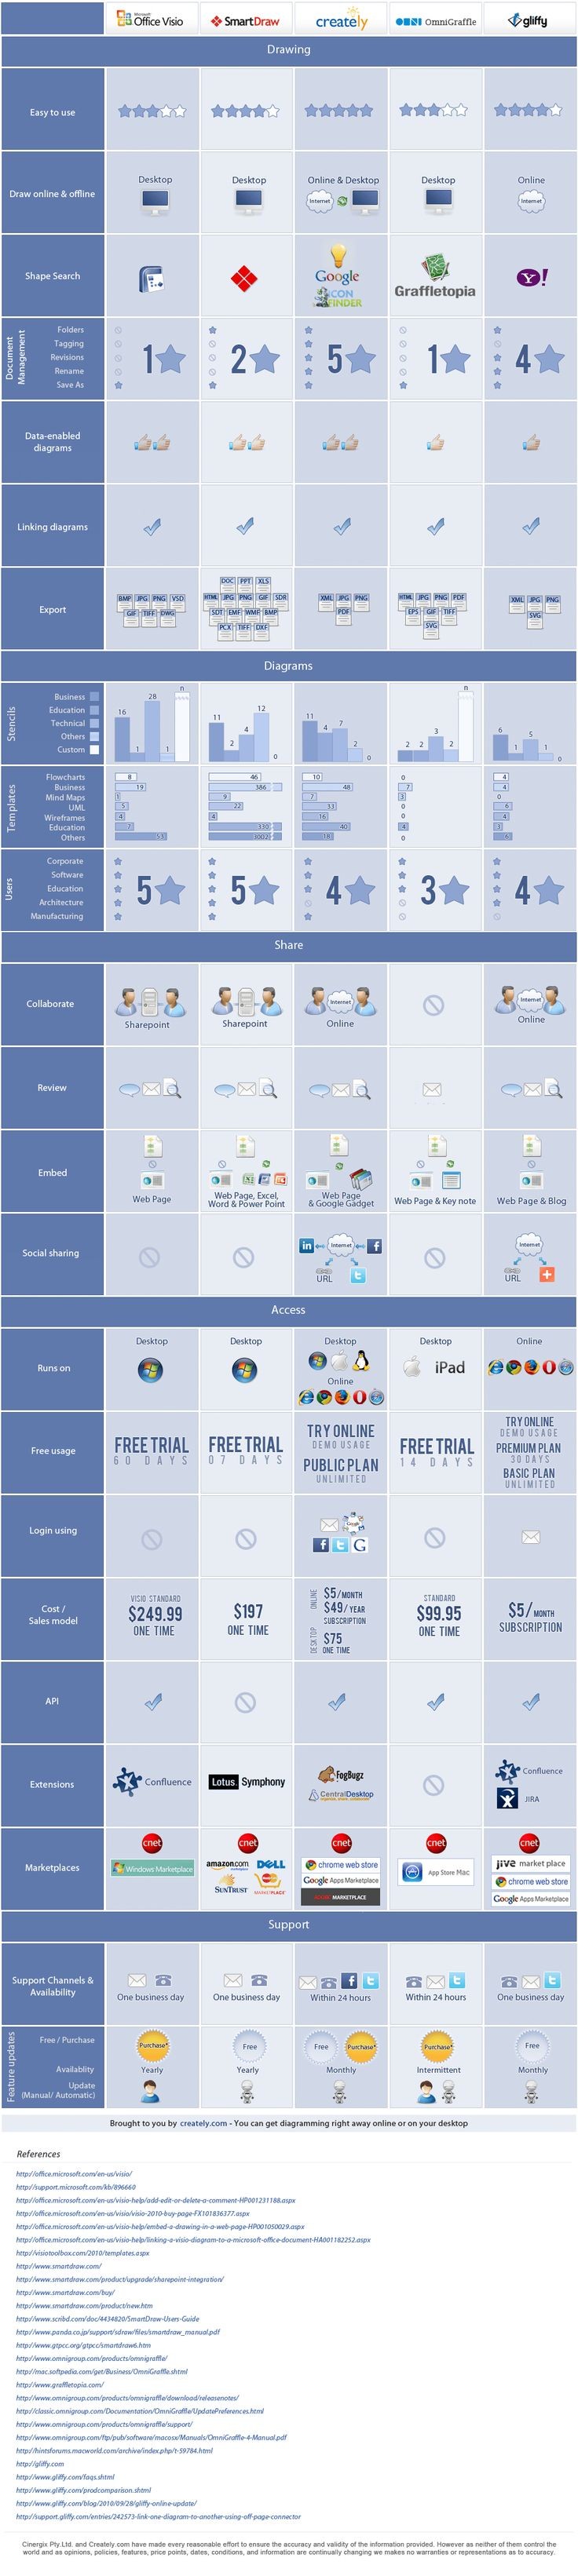 A parison infographic on Visio Smart Draw Creately Omnigraffle and Gliffy